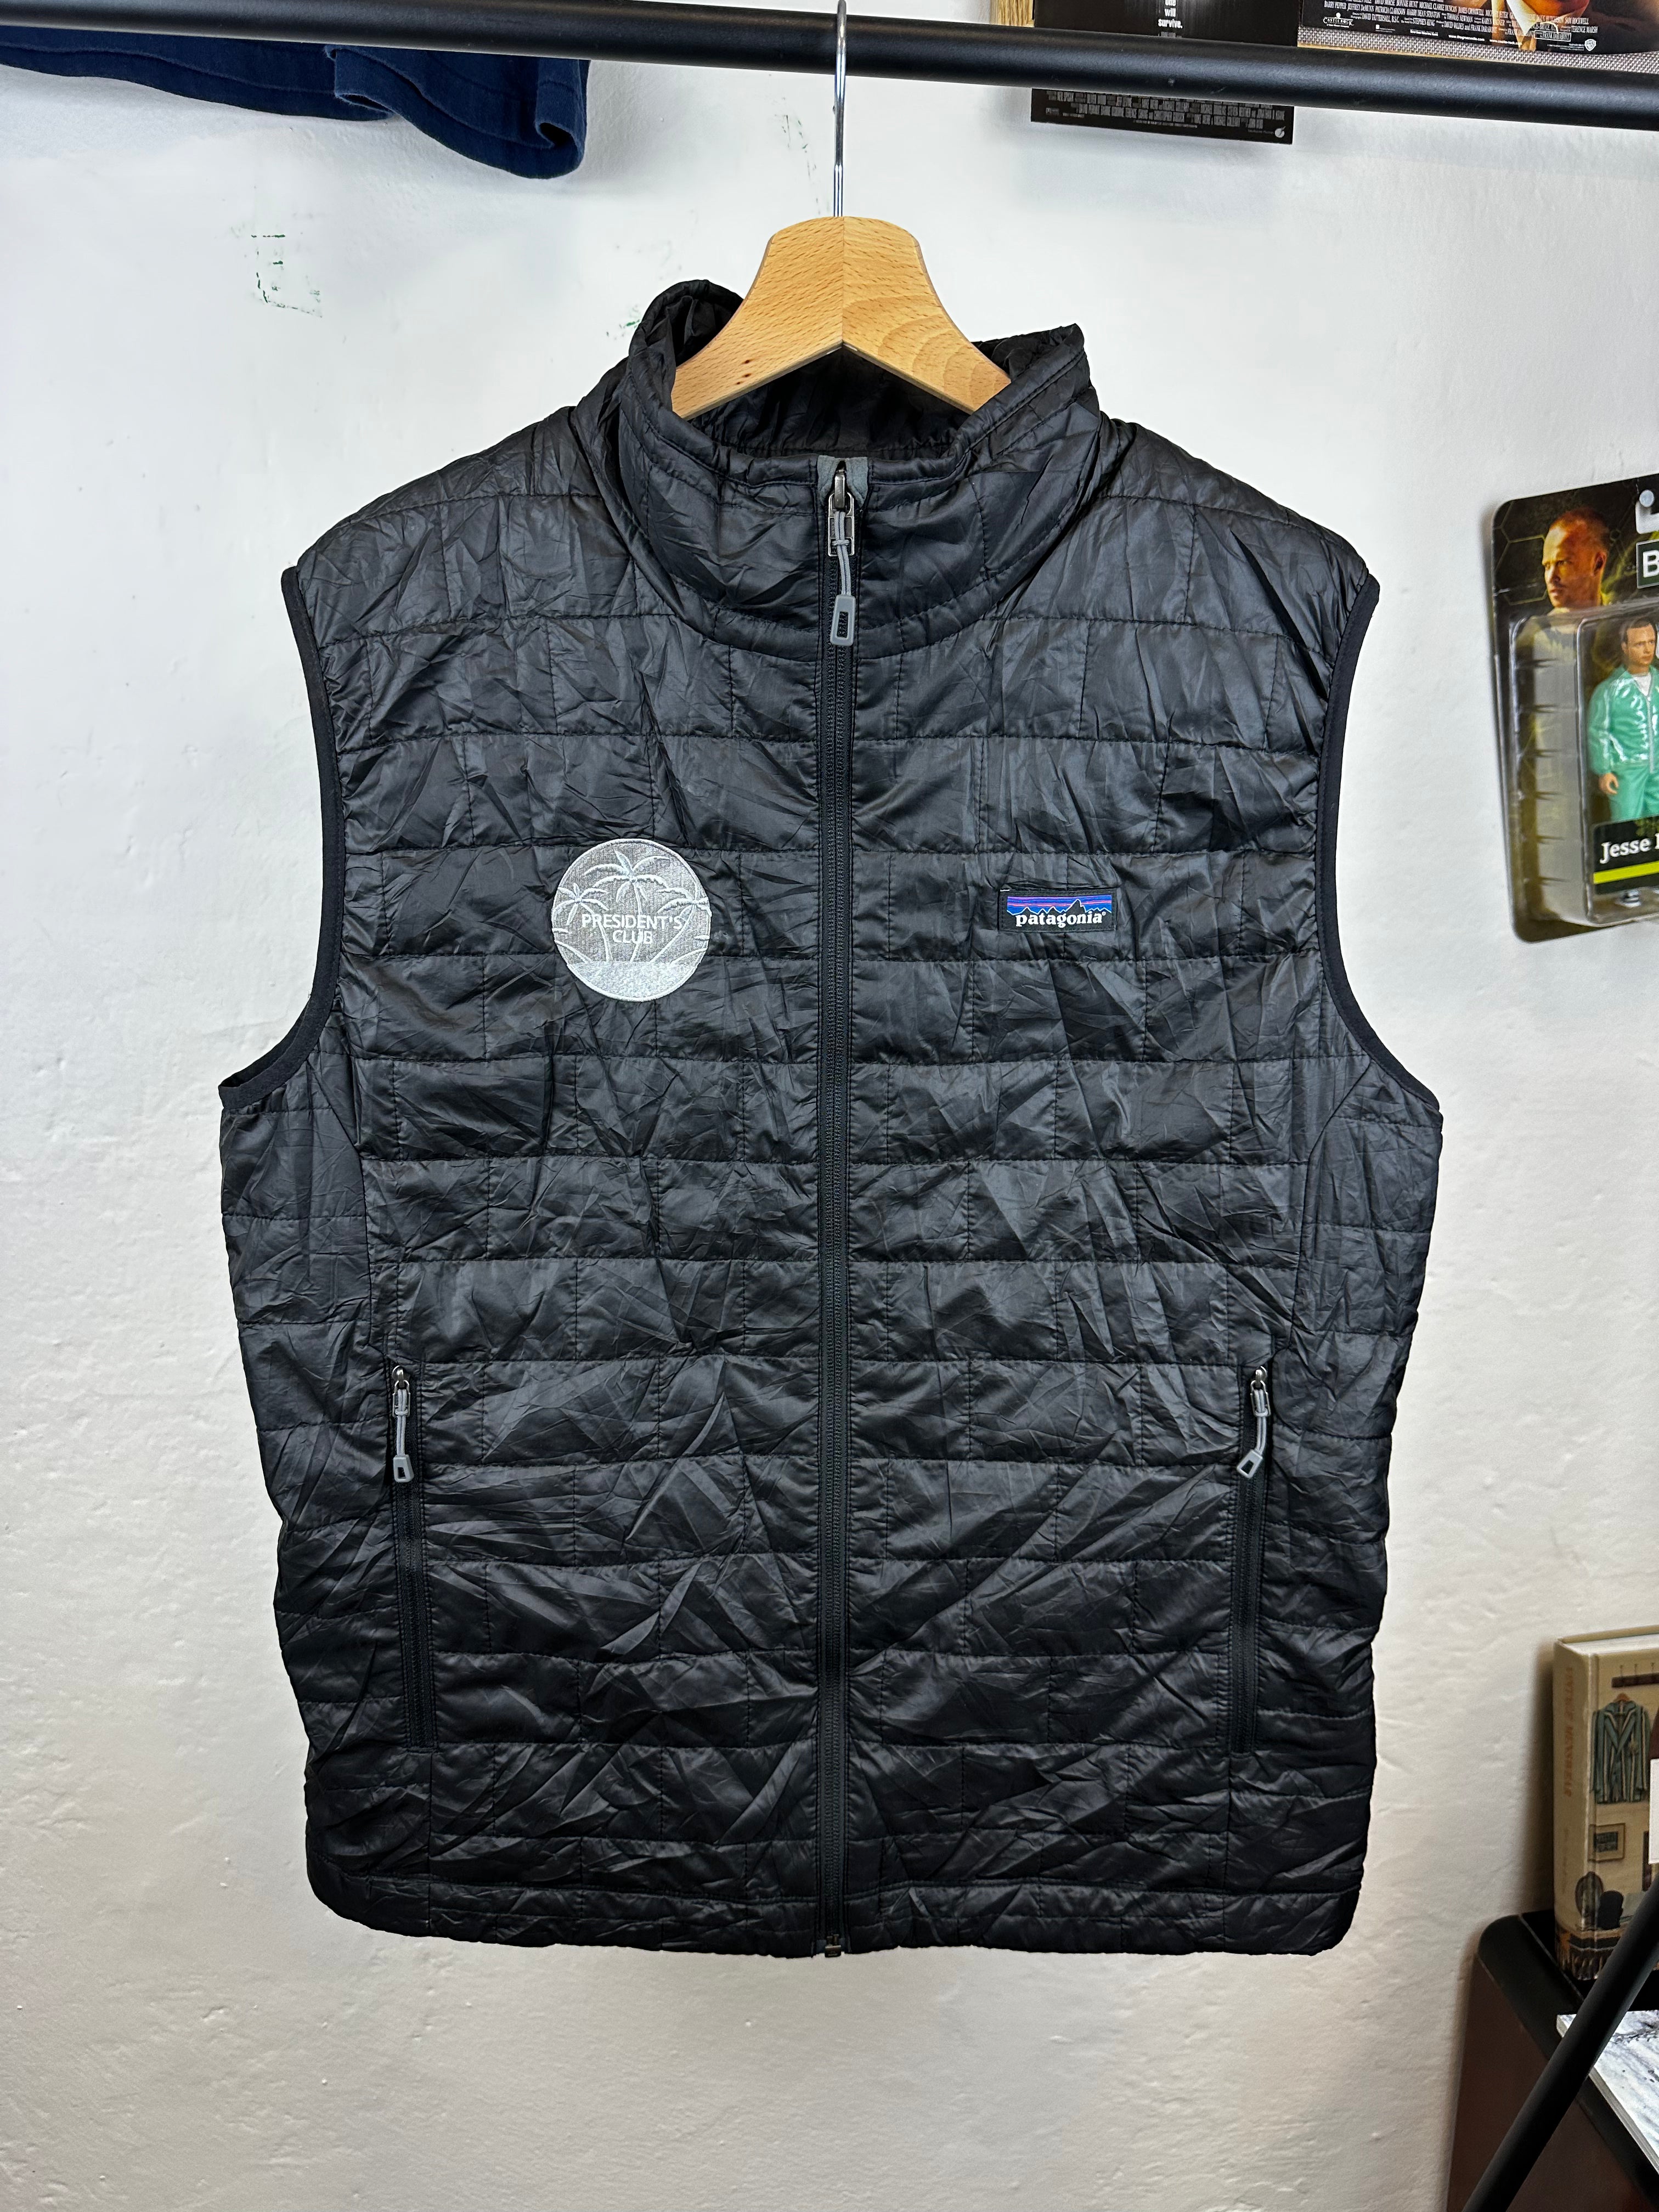 Patagonia “President’s Club” Micro Puff Vest - size L